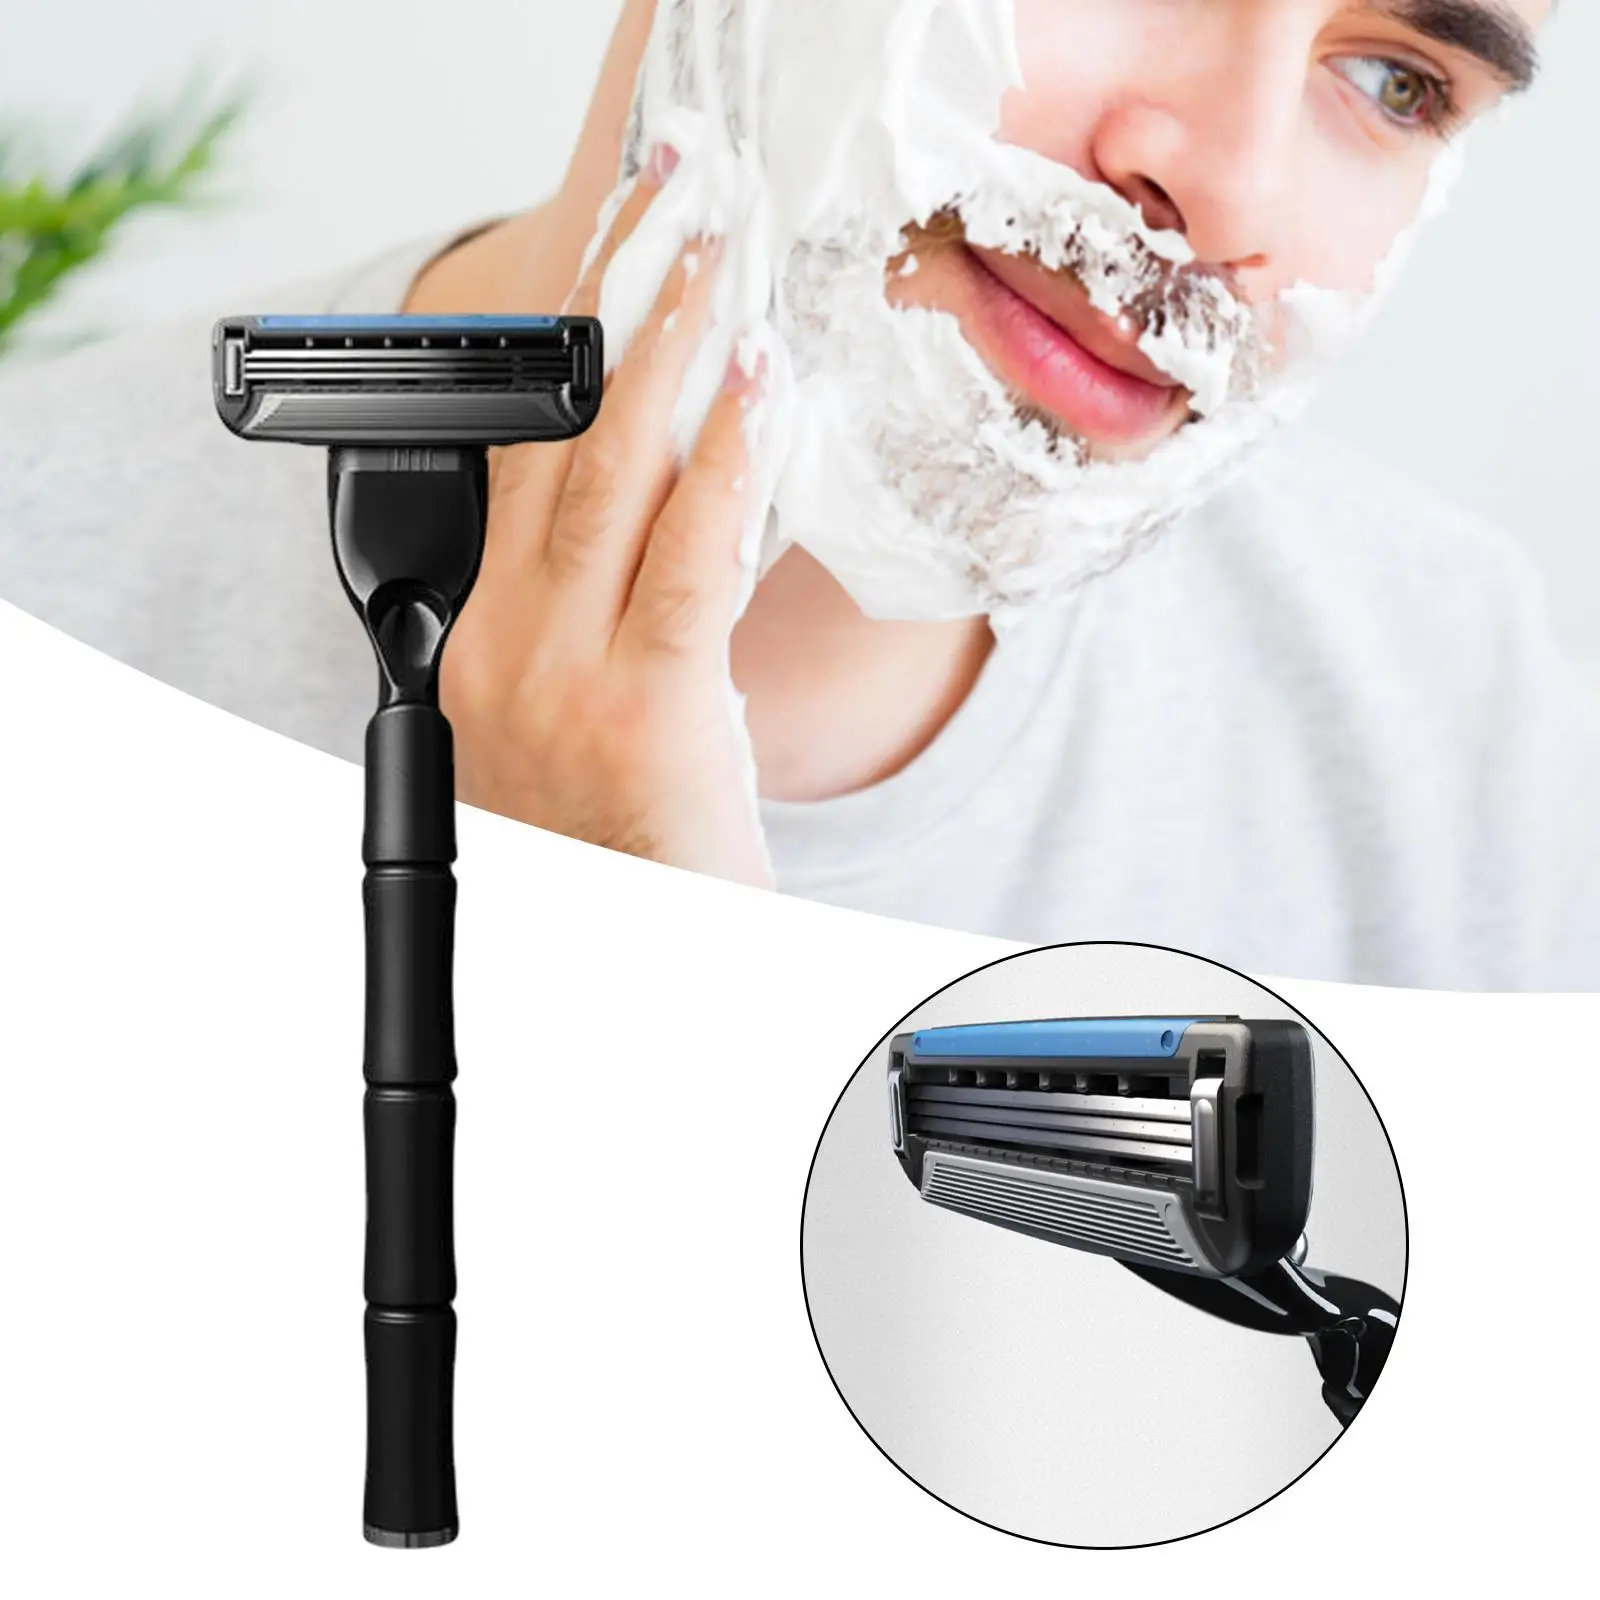 Safety Shaving Razor Stainless Steel Anti-Clog Design with Vitamin E Hypoallergenic Lubricating Strips for Hair Removal Beard